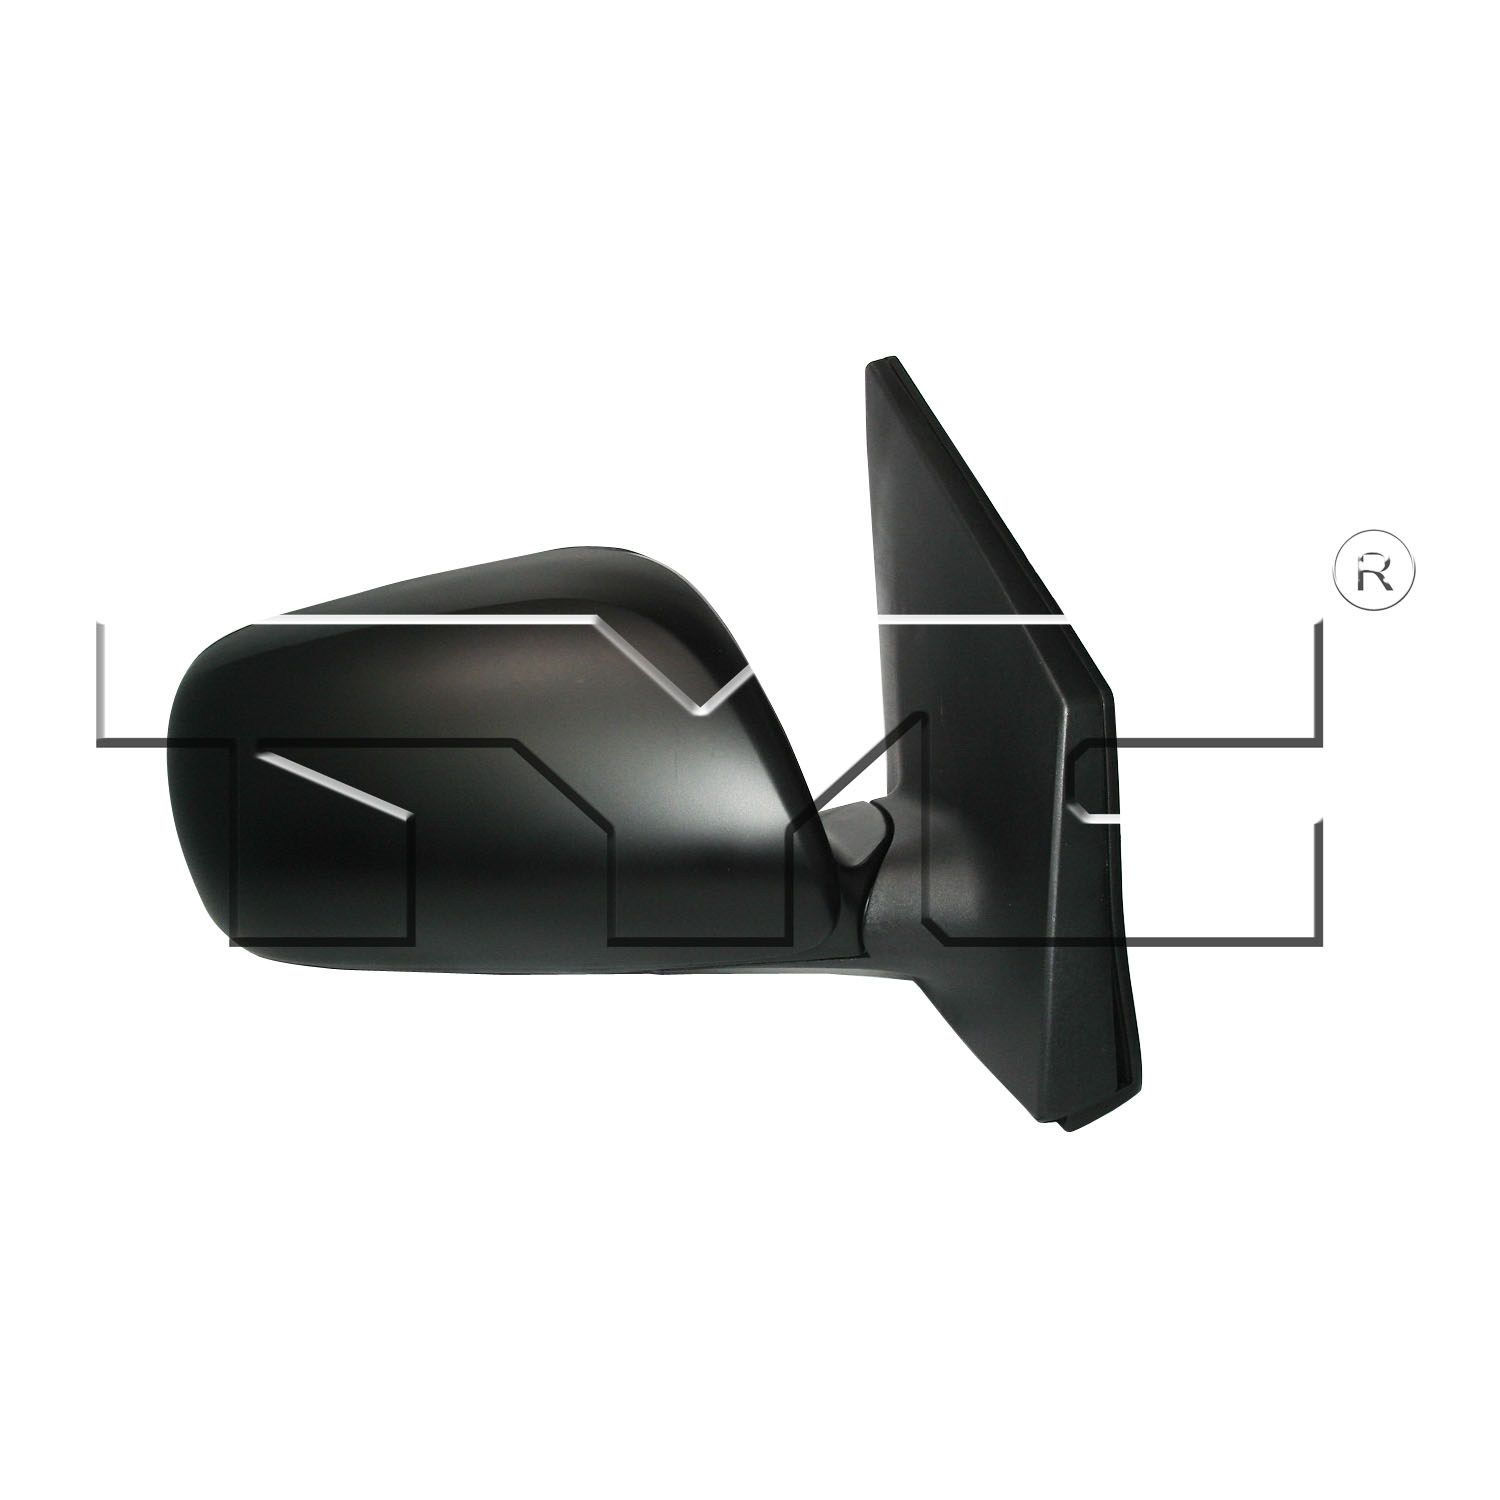 Aftermarket MIRRORS for TOYOTA - COROLLA, COROLLA,09-13,RT Mirror outside rear view